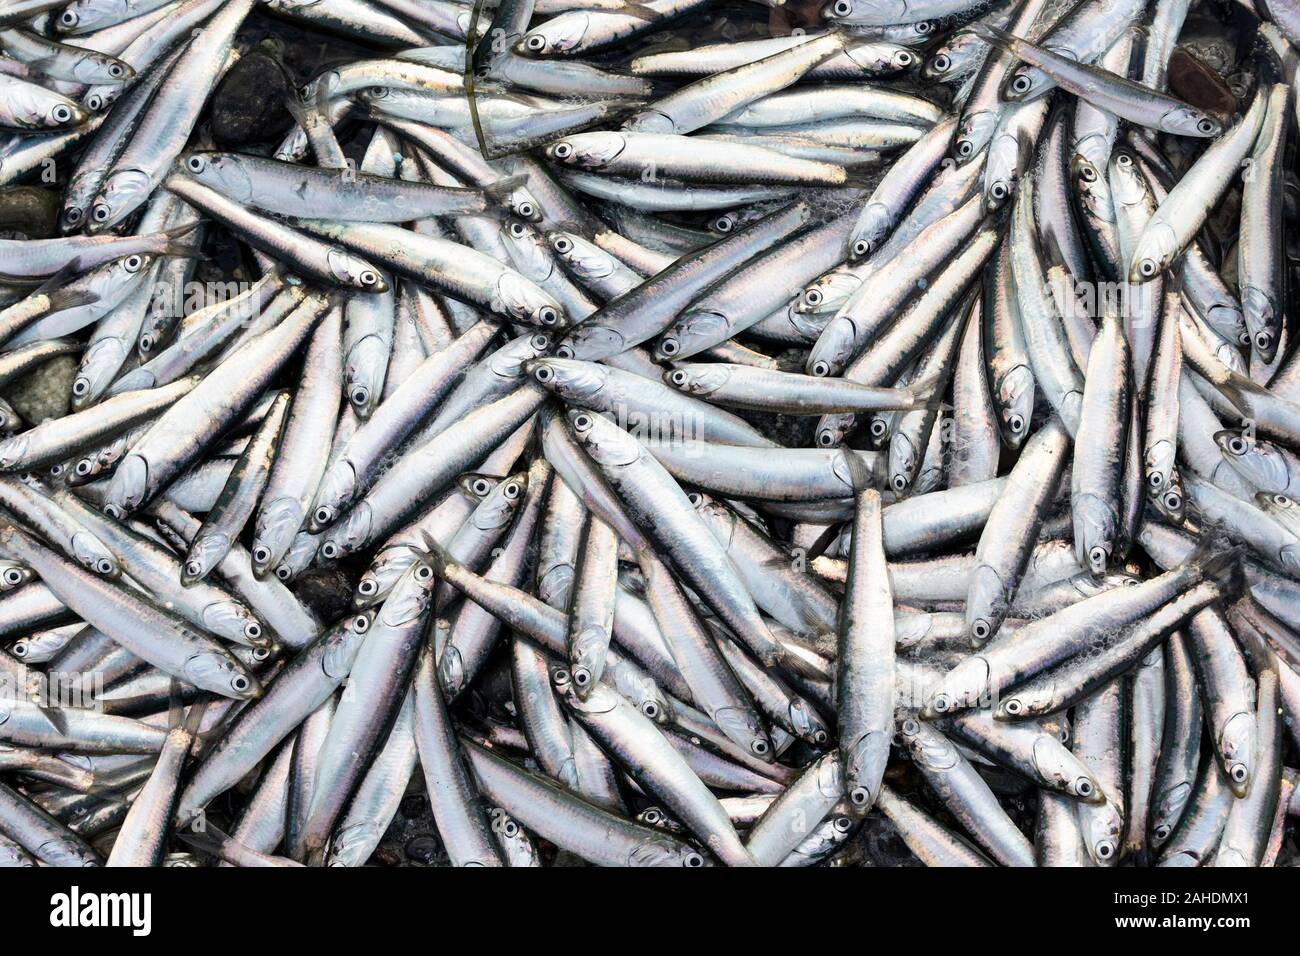 Northern Anchovies , thousands of tiny fish wash up on shore at White Rock Pier, BC Canada Stock Photo